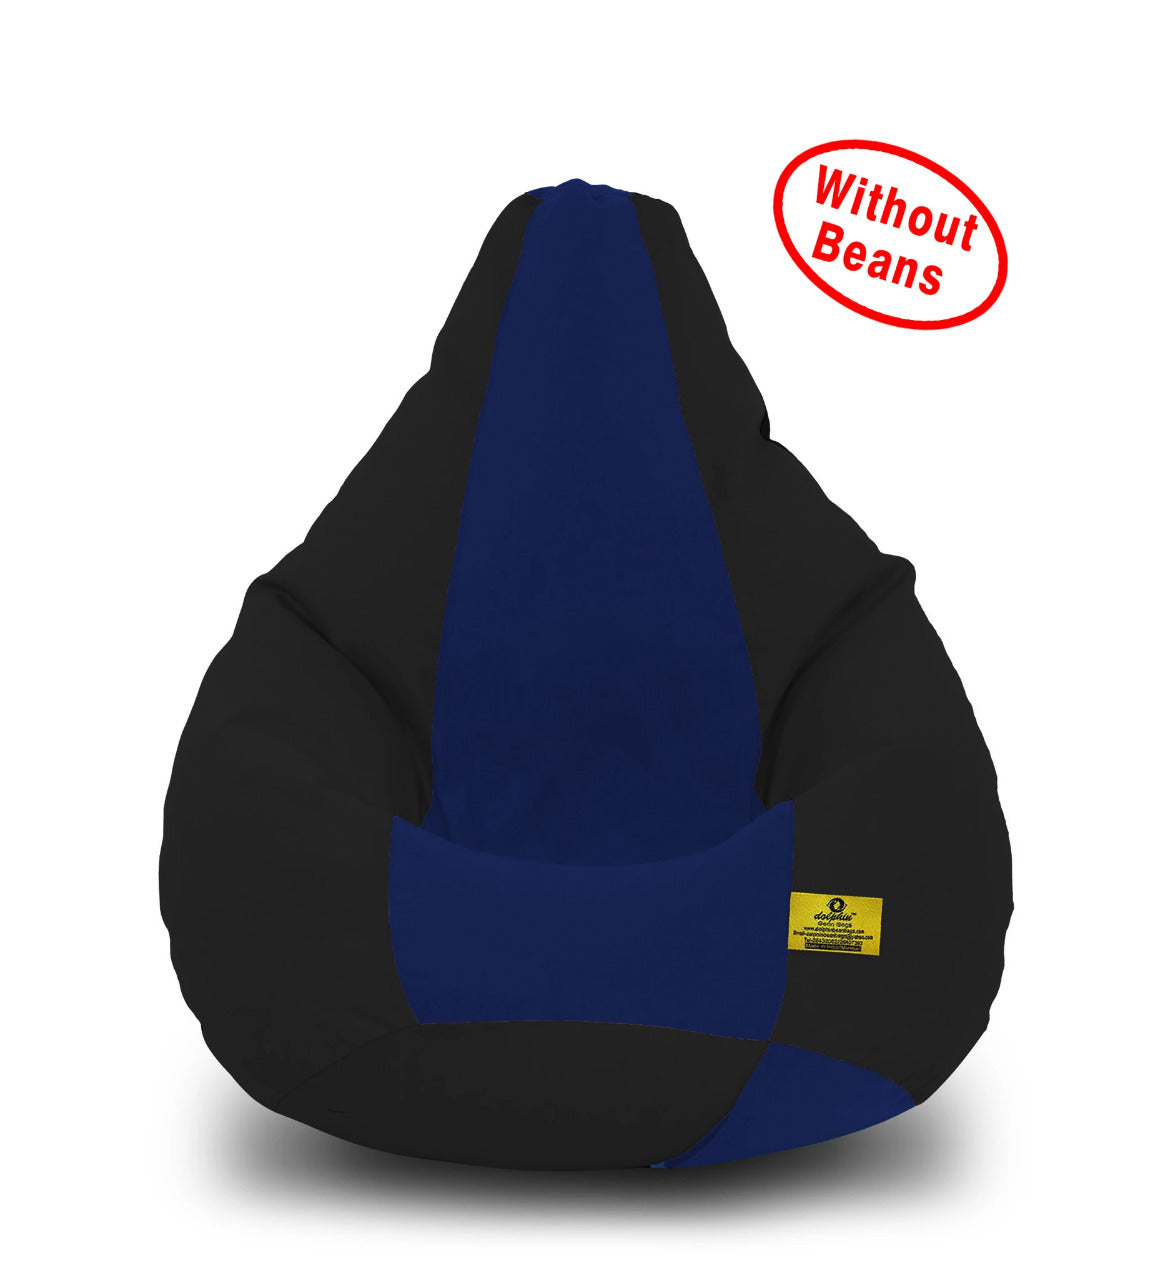 Bean Bag: XL Black/N.Blue Fabric Cover (Without Beans)